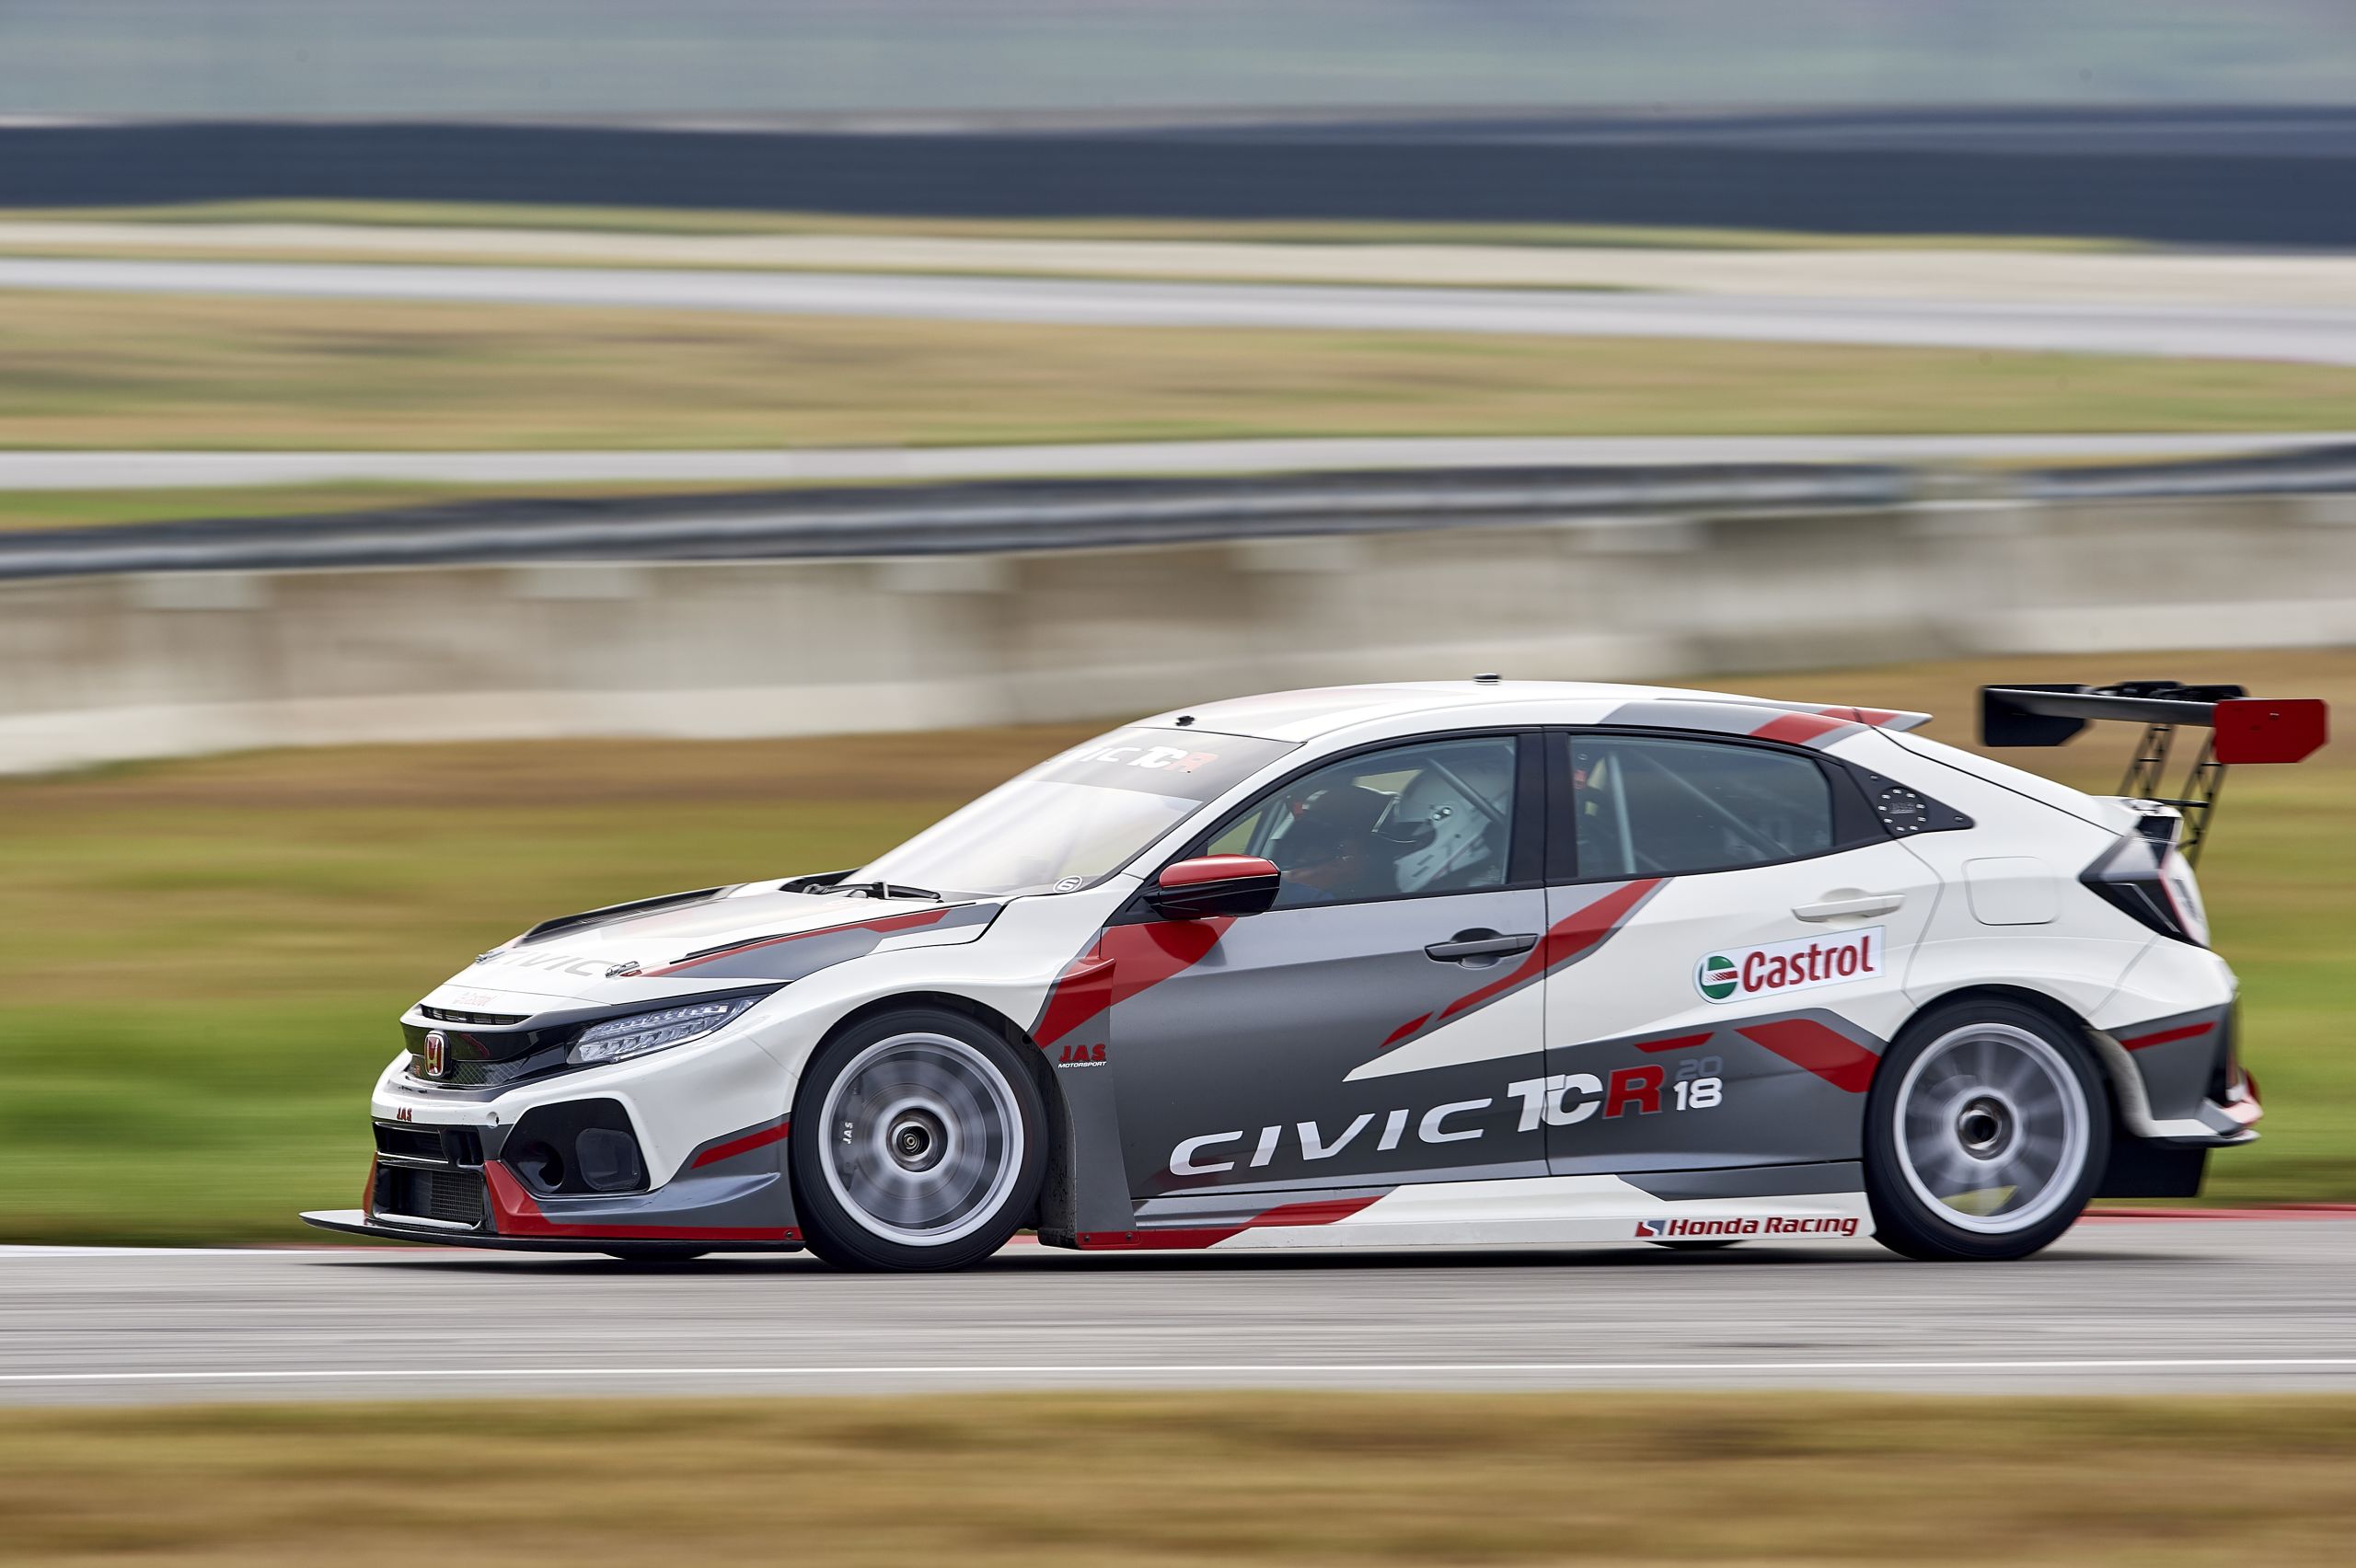 A Completely Different Animal The Civic Tcr Honda Engine Room